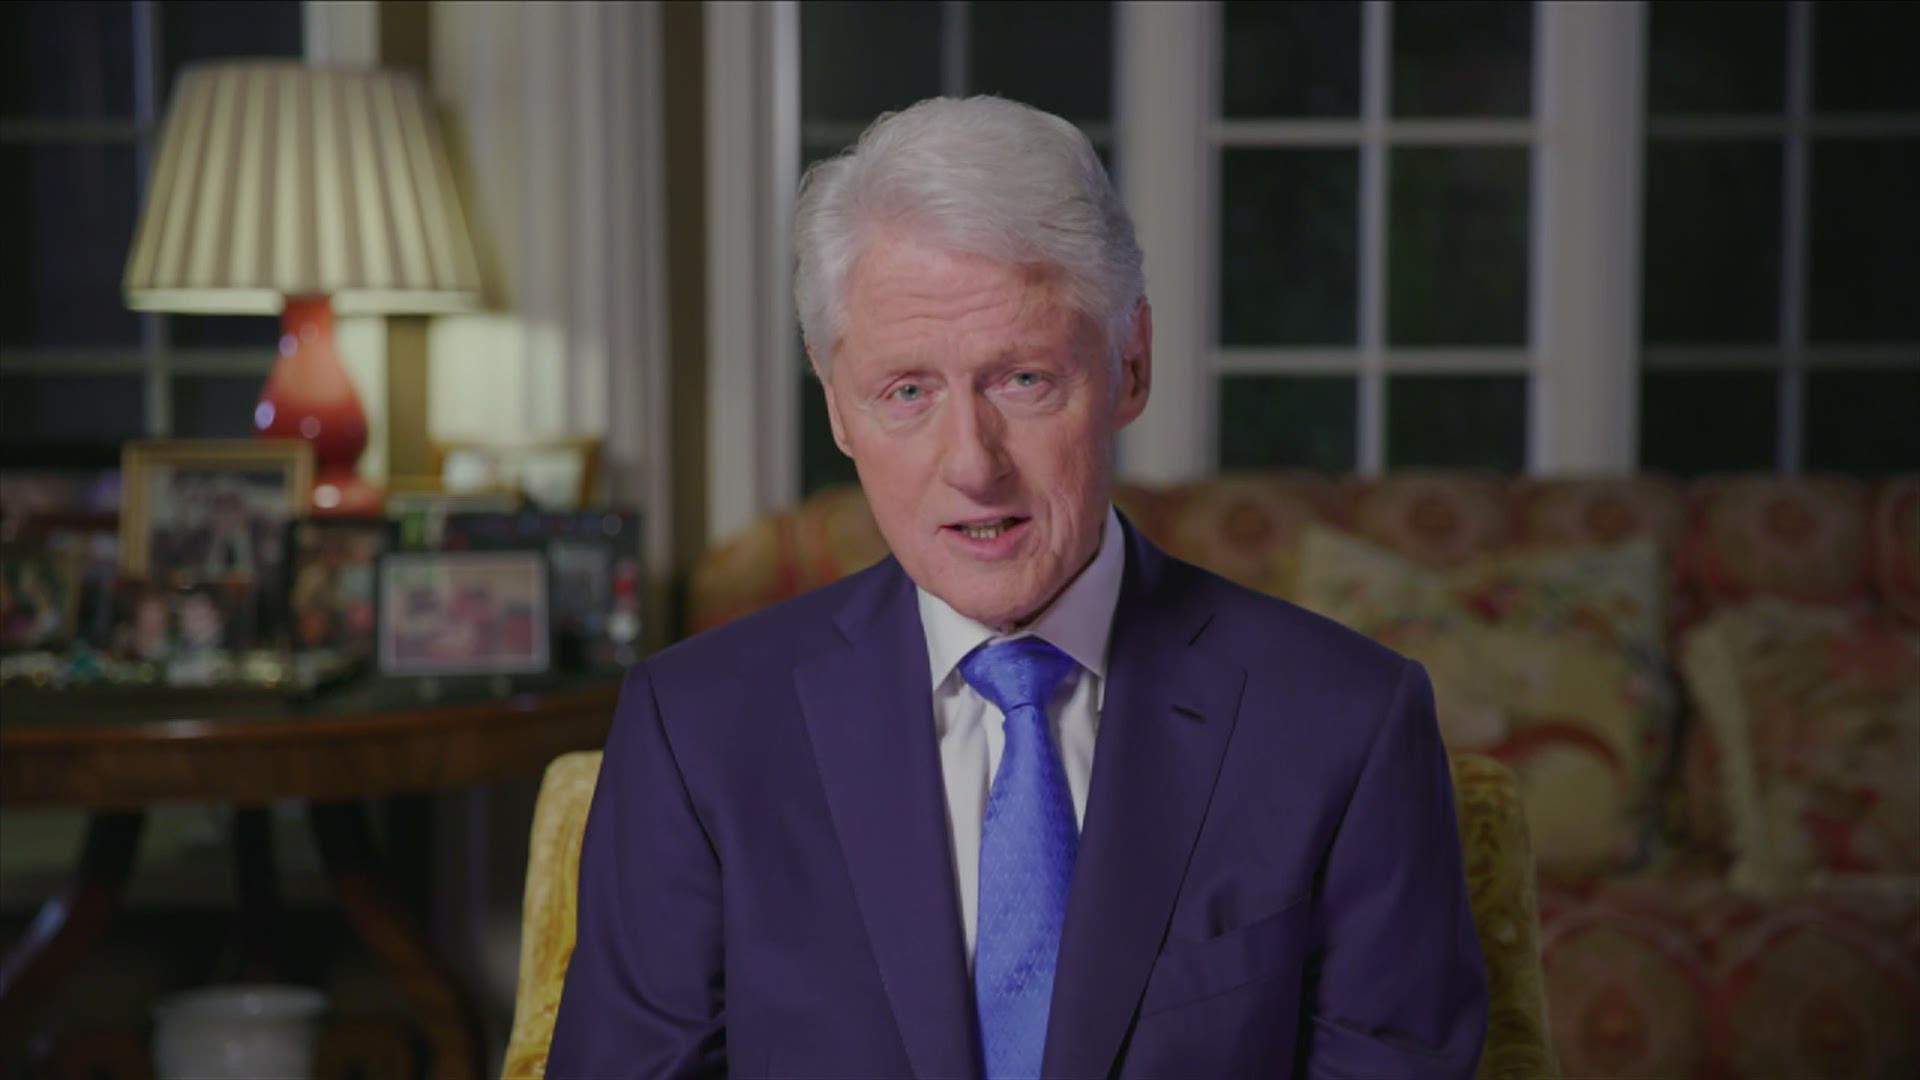 Our VERIFY team fact-checked what Bill Clinton said about unemployment and COVID-19 during the second night of the 2020 Democratic National Convention.